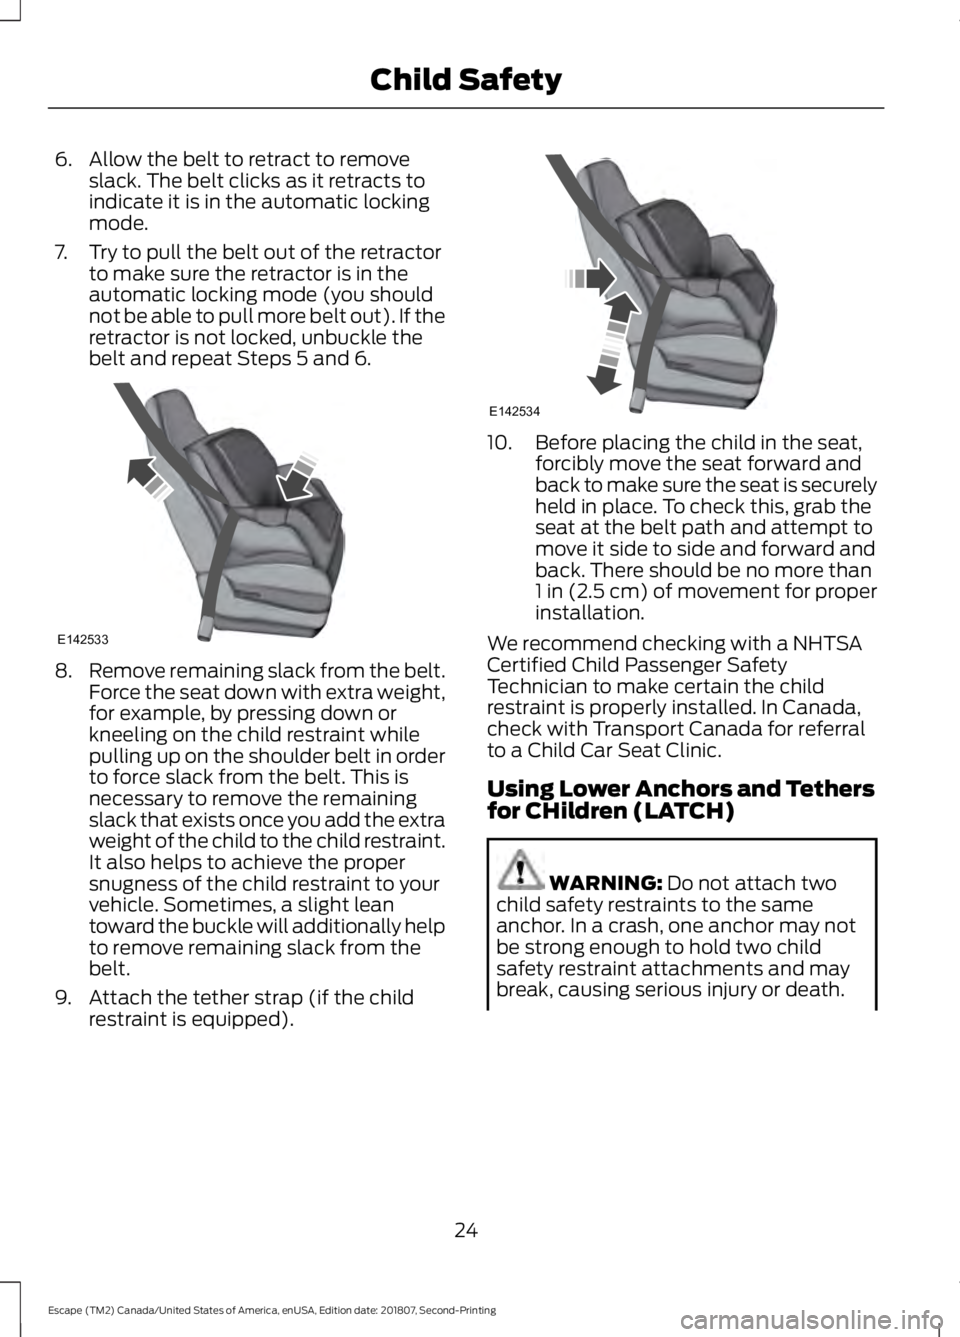 FORD ESCAPE 2019  Owners Manual 6. Allow the belt to retract to remove
slack. The belt clicks as it retracts to
indicate it is in the automatic locking
mode.
7. Try to pull the belt out of the retractor to make sure the retractor is